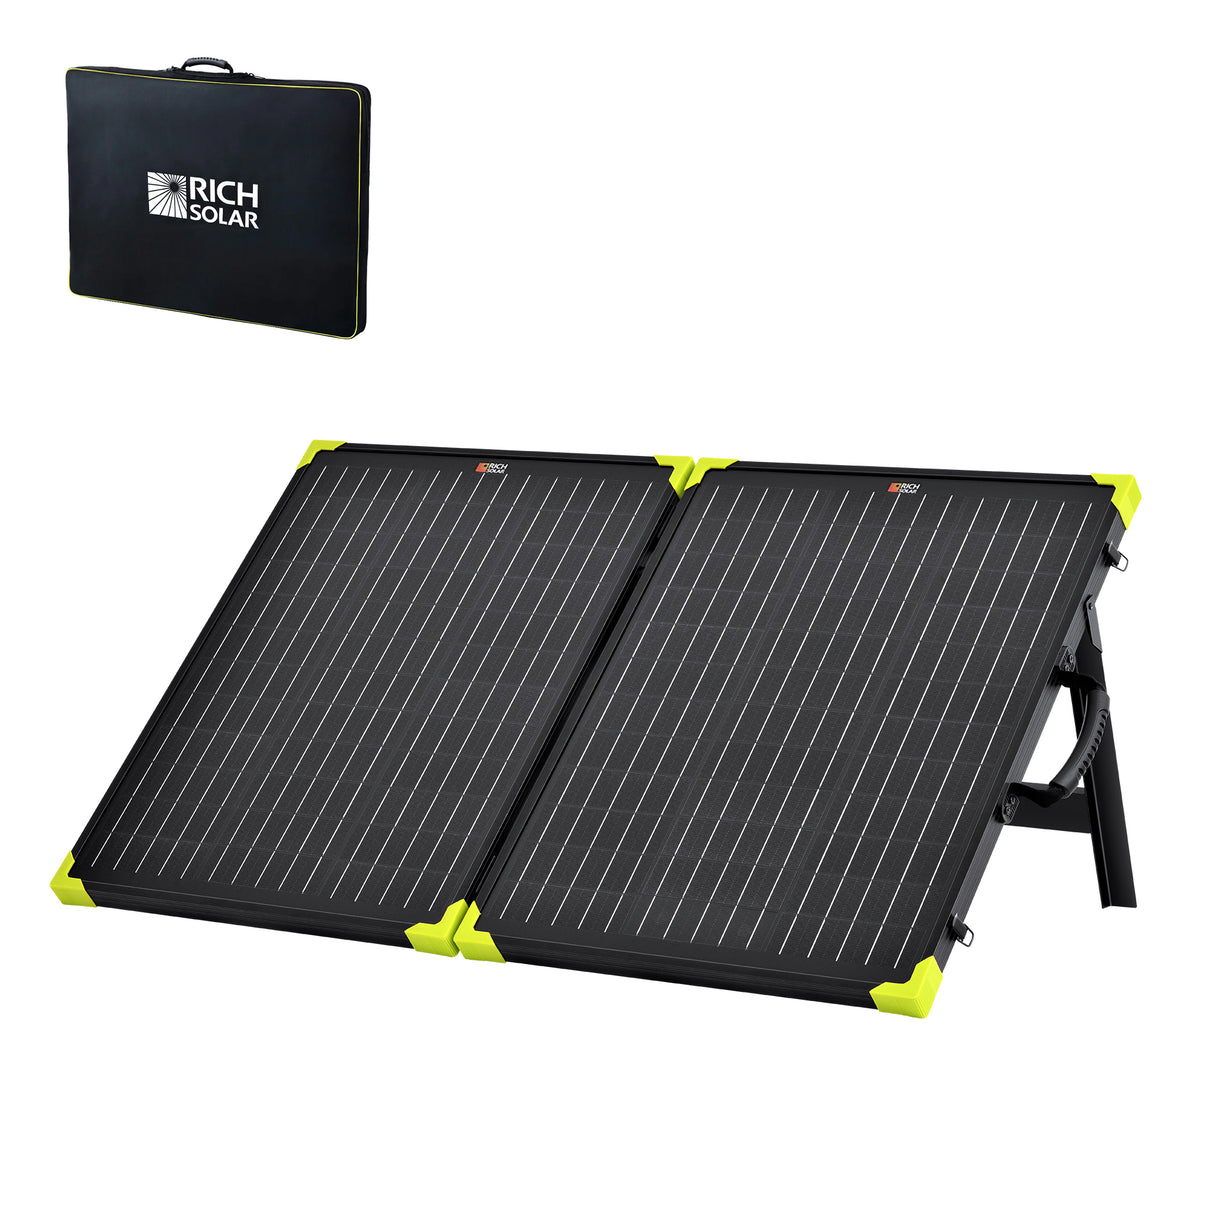 MEGA 100 Watt Portable Solar Panel Briefcase by RICH SOLAR, a compact and efficient solution for sustainable energy on the go, perfect for travelers and outdoor enthusiasts.